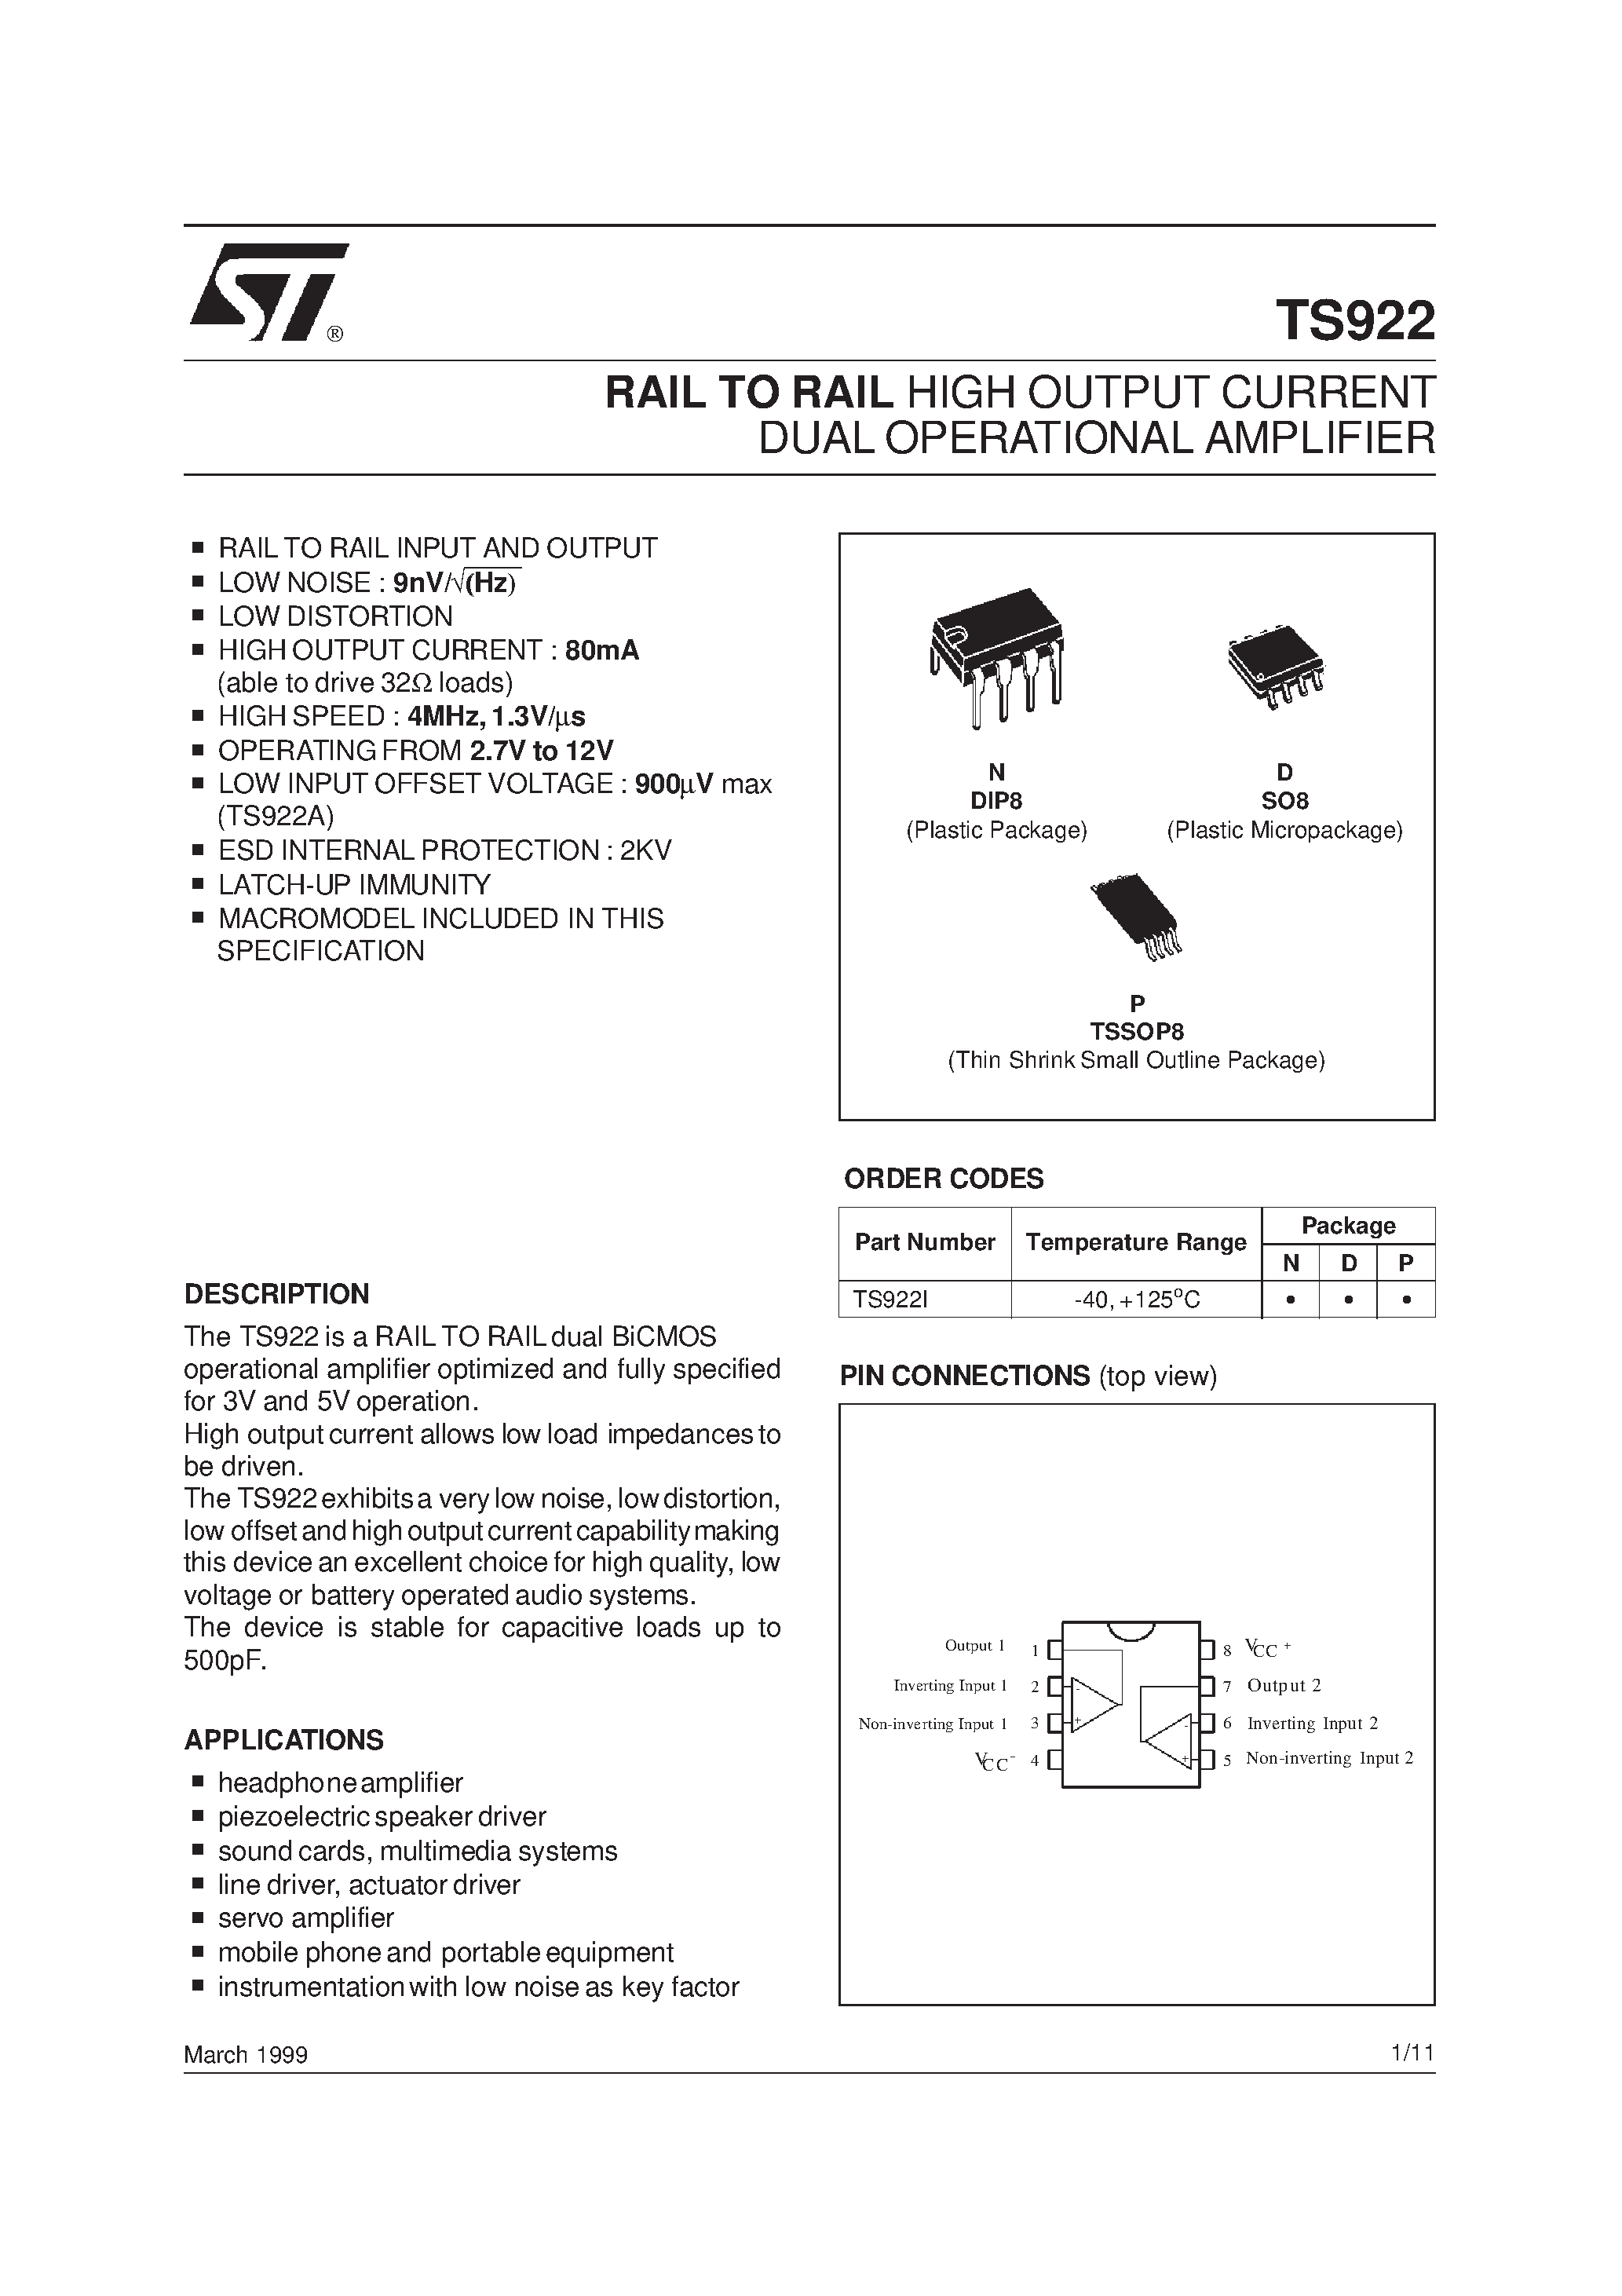 Datasheet TS922 - RAIL TO RAIL HIGH OUTPUT CURRENT QUAD OPERATIONAL AMPLIFIER page 1